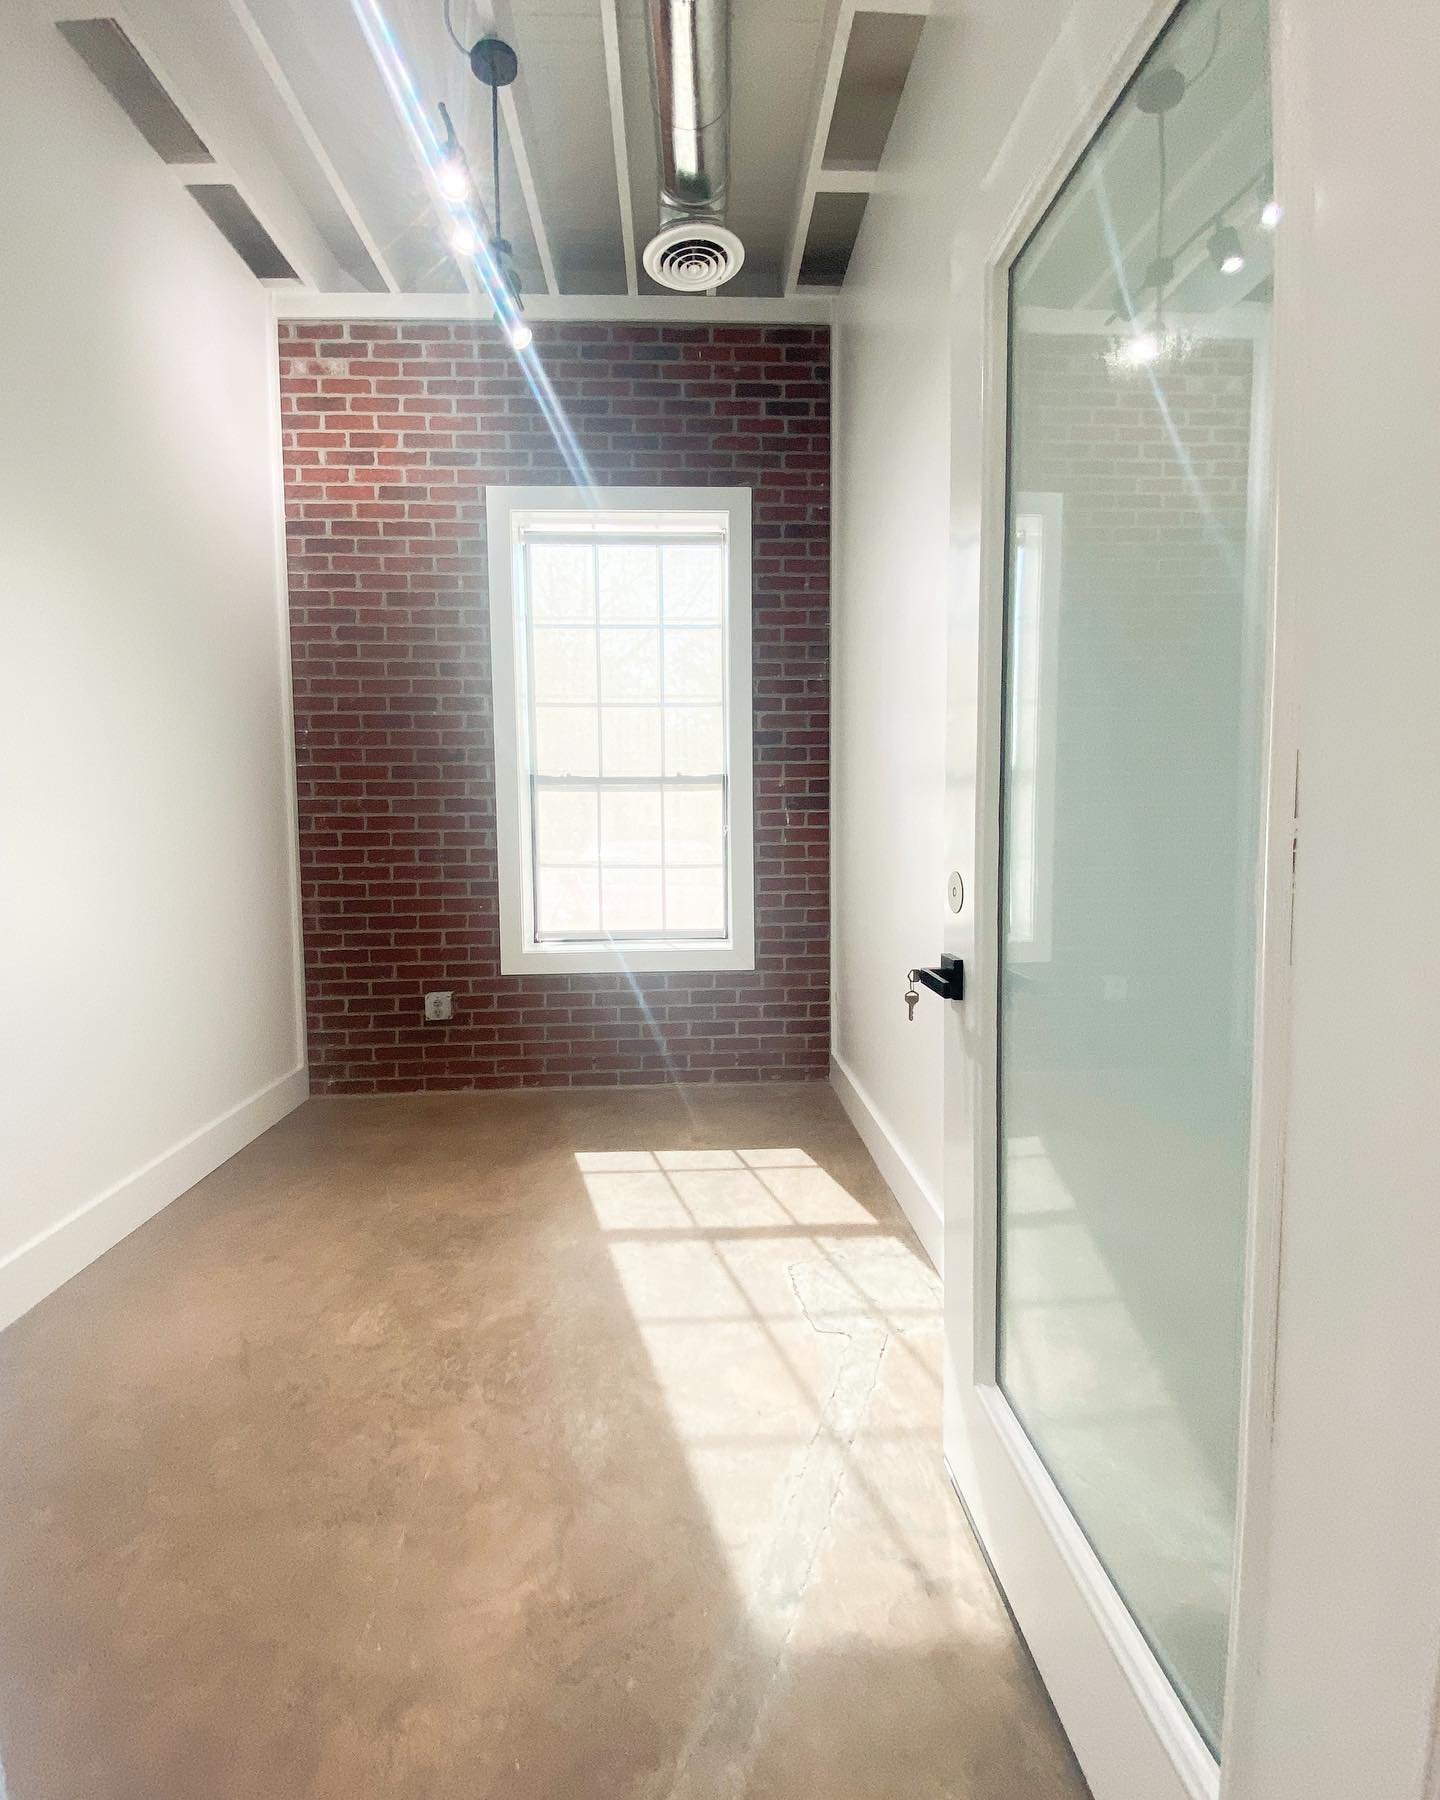 👀 Here&rsquo;s a peak into one of our new offices. This office is fresh 🌱 and it won&rsquo;t last long! 
If you&rsquo;re looking for a private office in West Homewood shoot us a DM. You&rsquo;ll be in an awesome locale and part of an even more awes